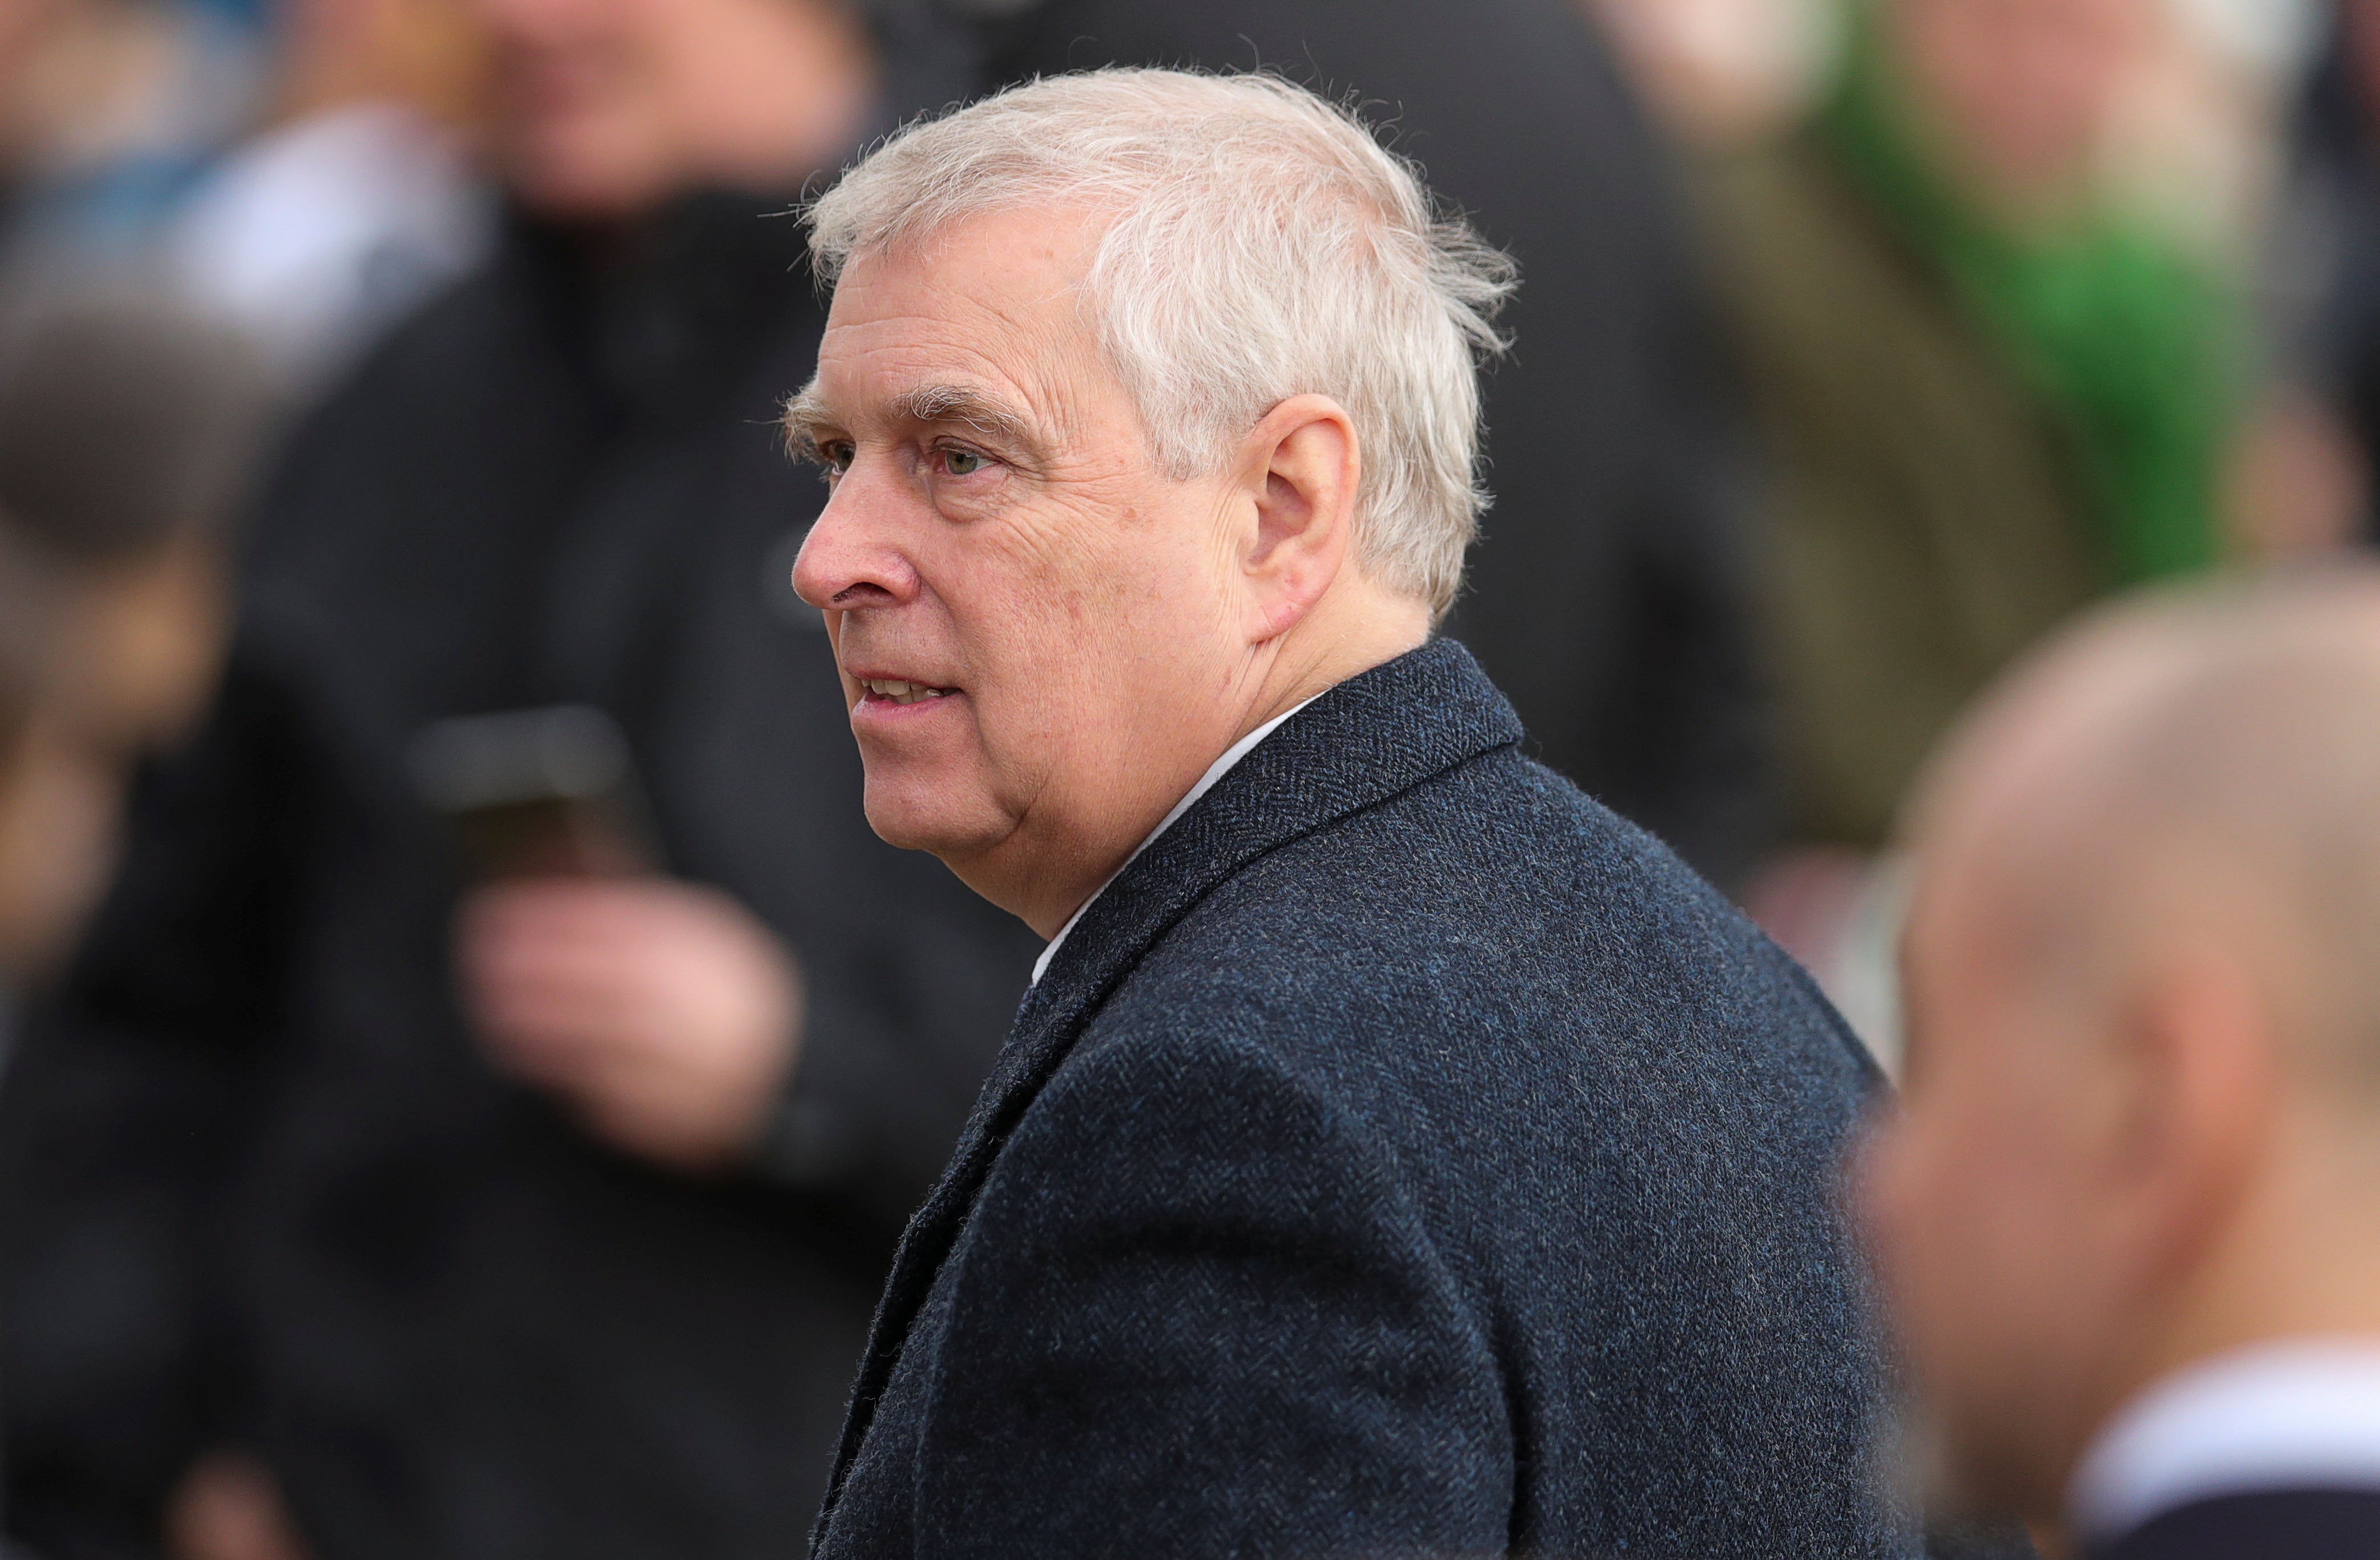 Prince Andrew has been named in court documents relating to the paedophile Jeffrey Epstein